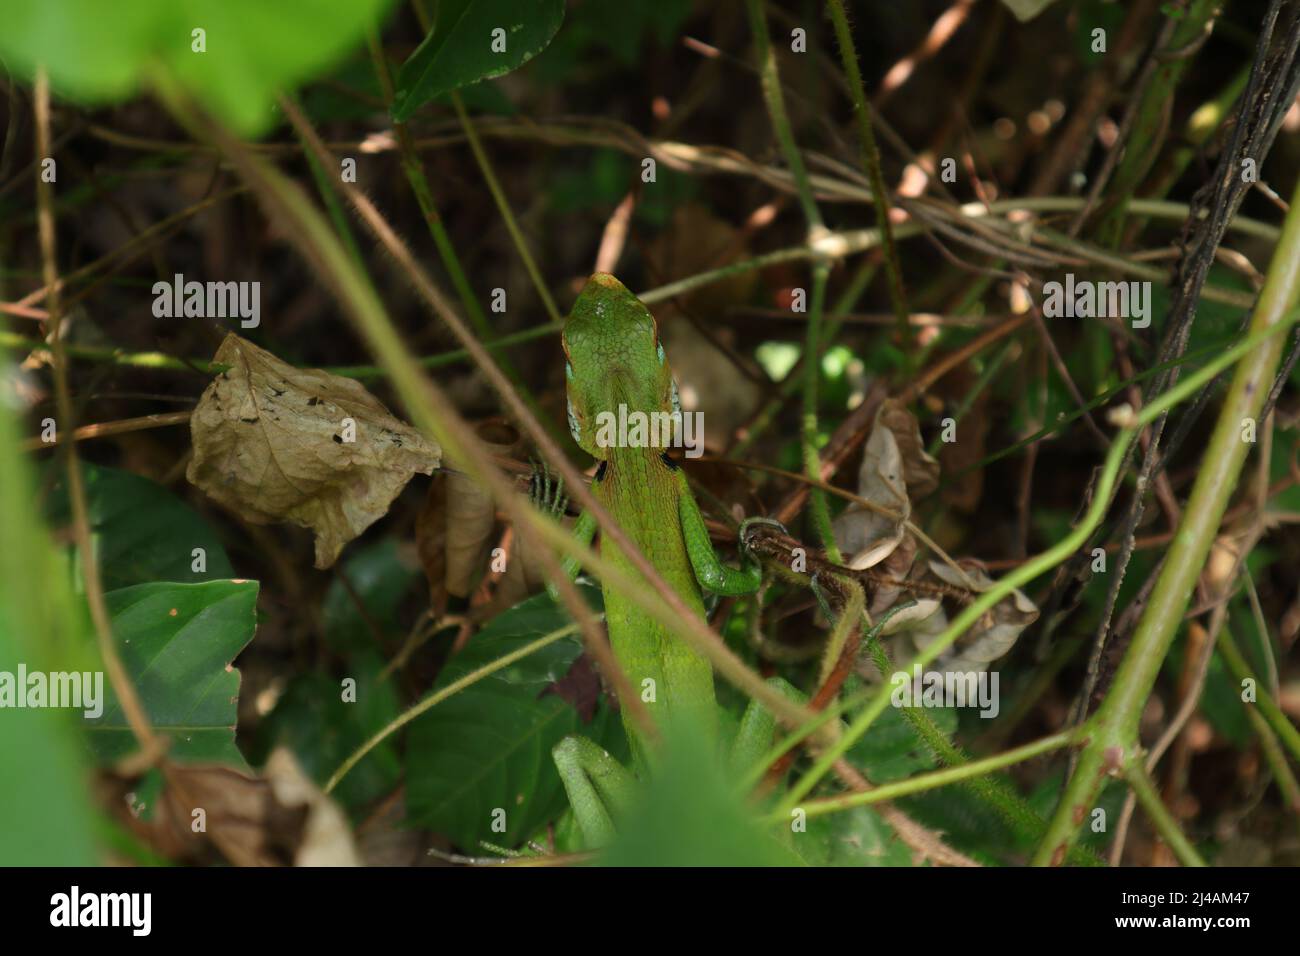 Overhead dorsal view of a common green forest lizard (Calotes calotes) sitting on top of a wild plant Stock Photo